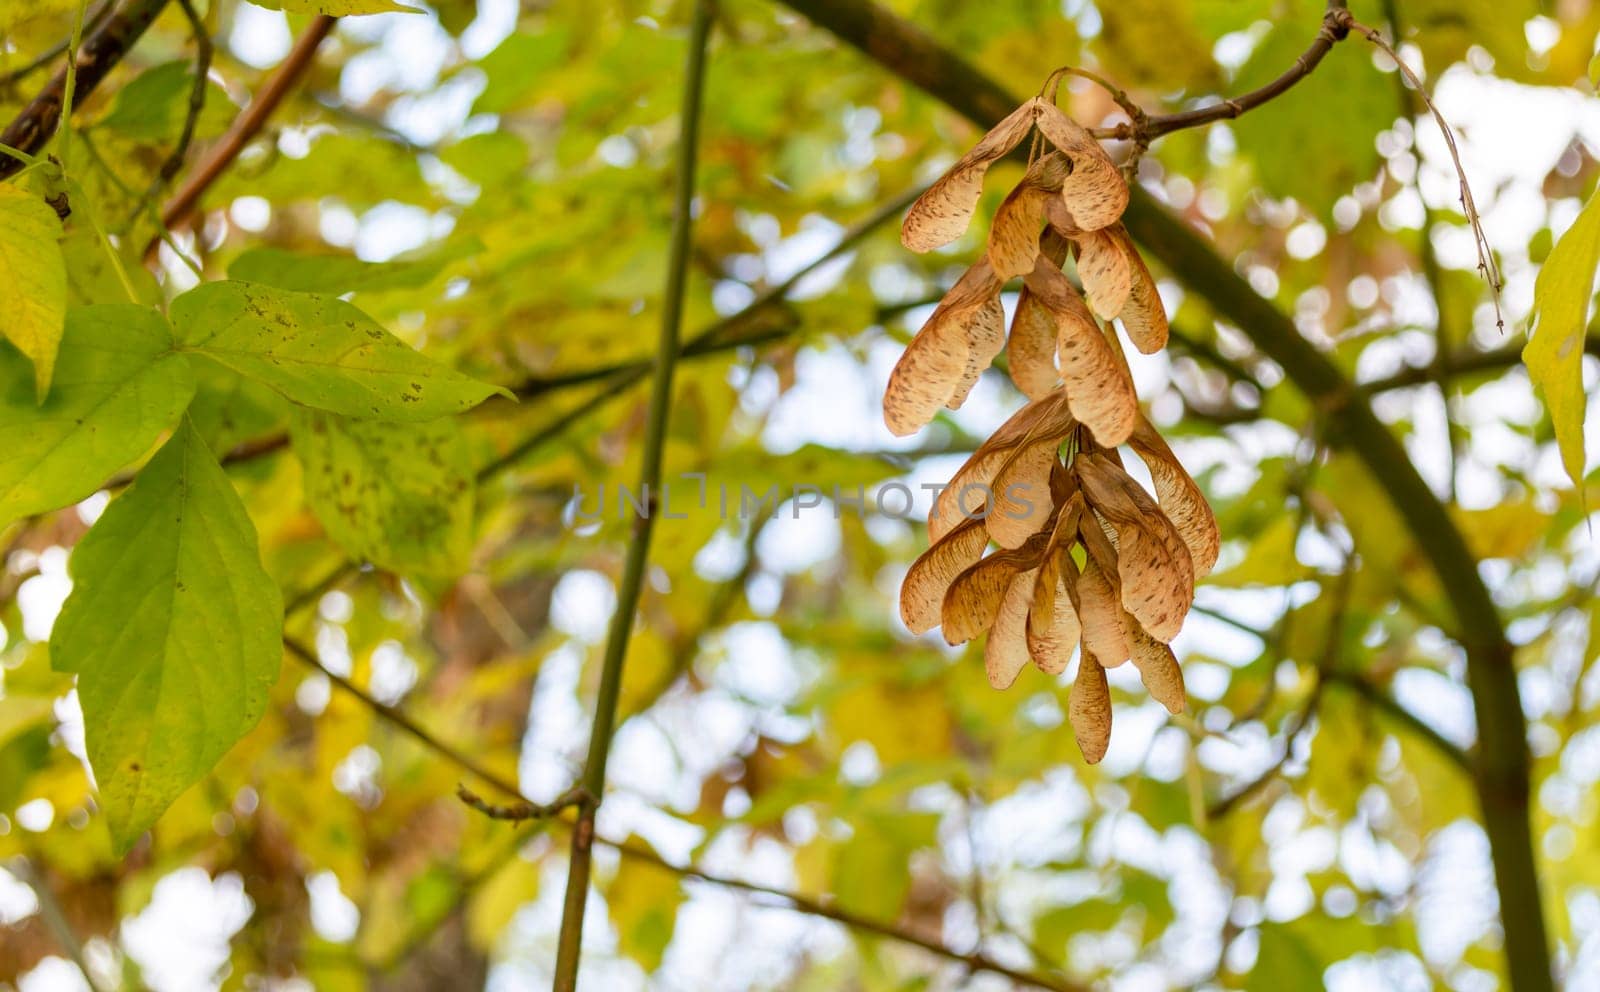 A pile of maple seeds hangs on a tree among yellow-green leaves.